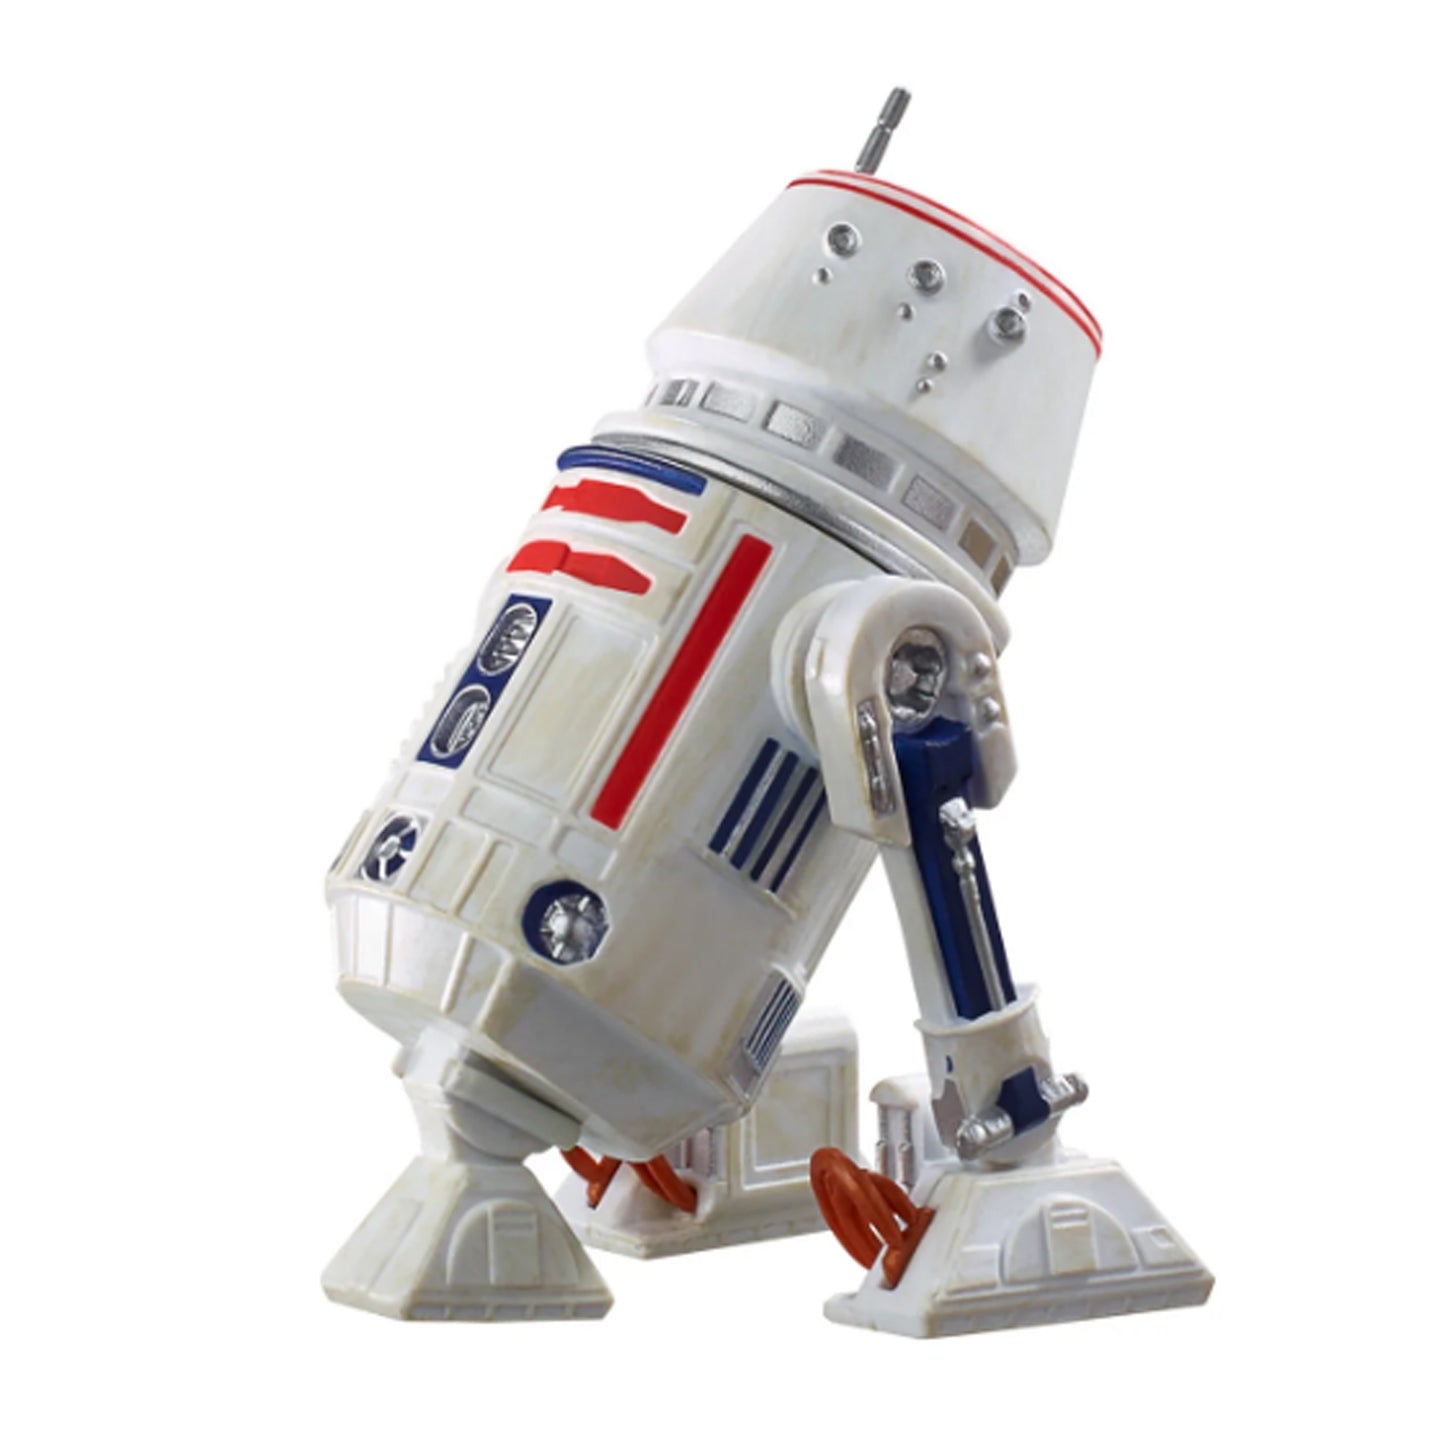 Star Wars The Vintage Collection (The Mandalorian) R5-D4